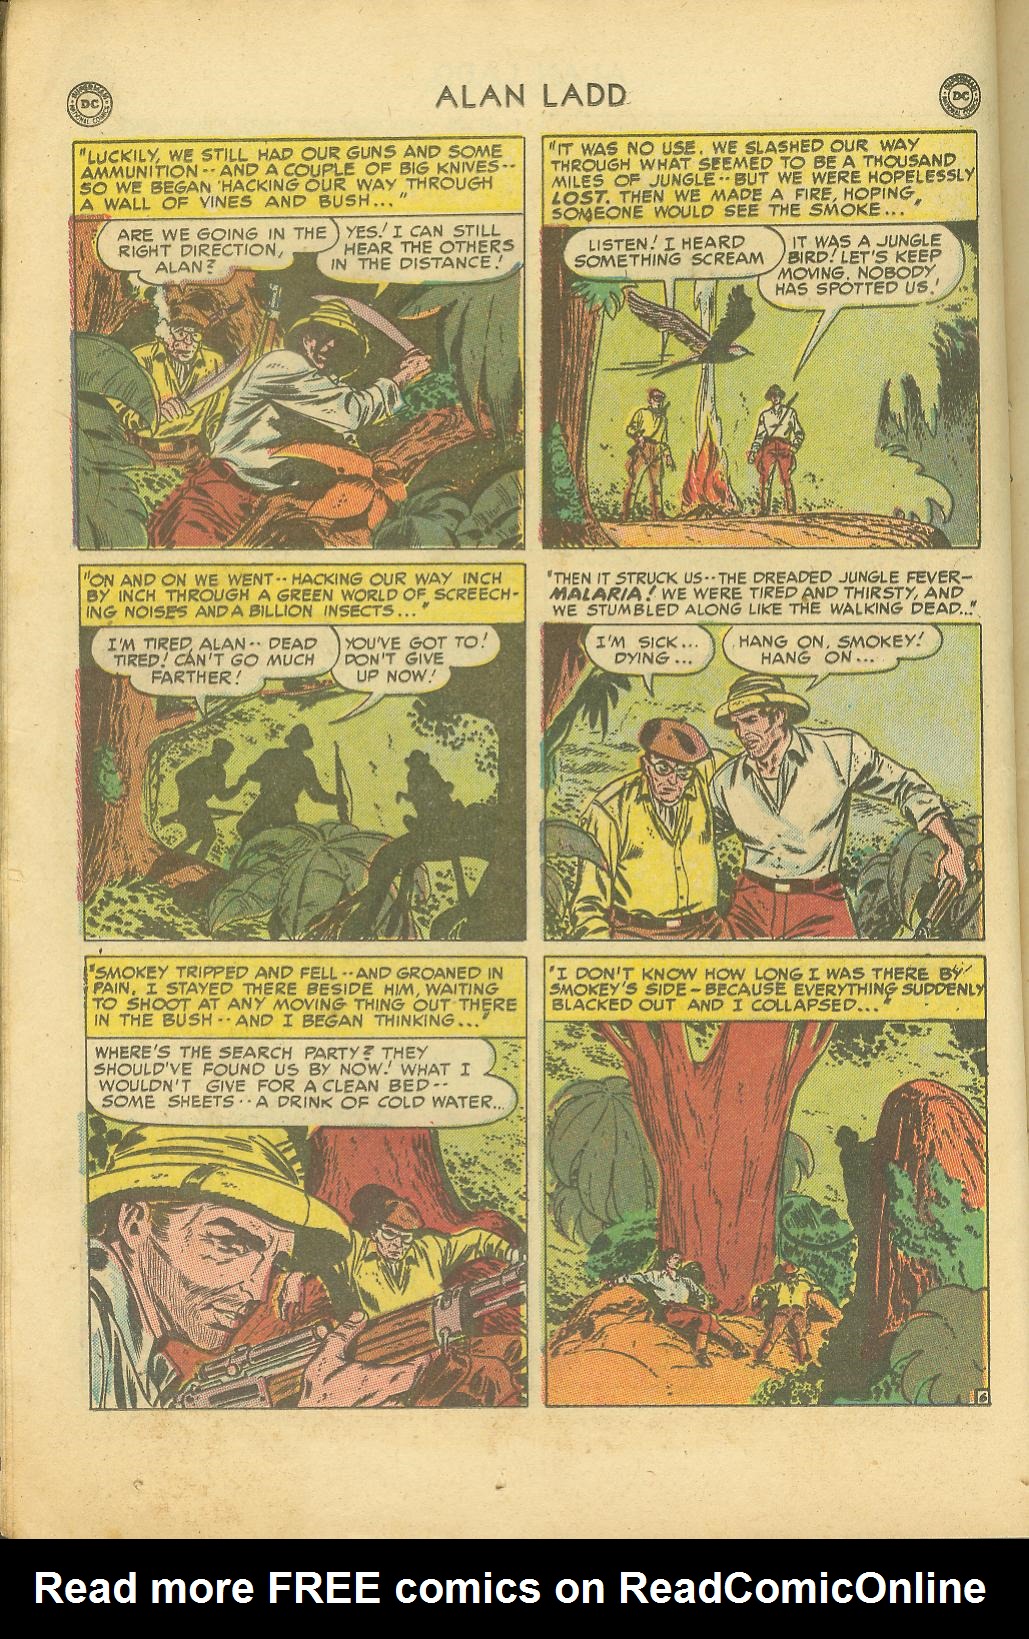 Read online Adventures of Alan Ladd comic -  Issue #7 - 20